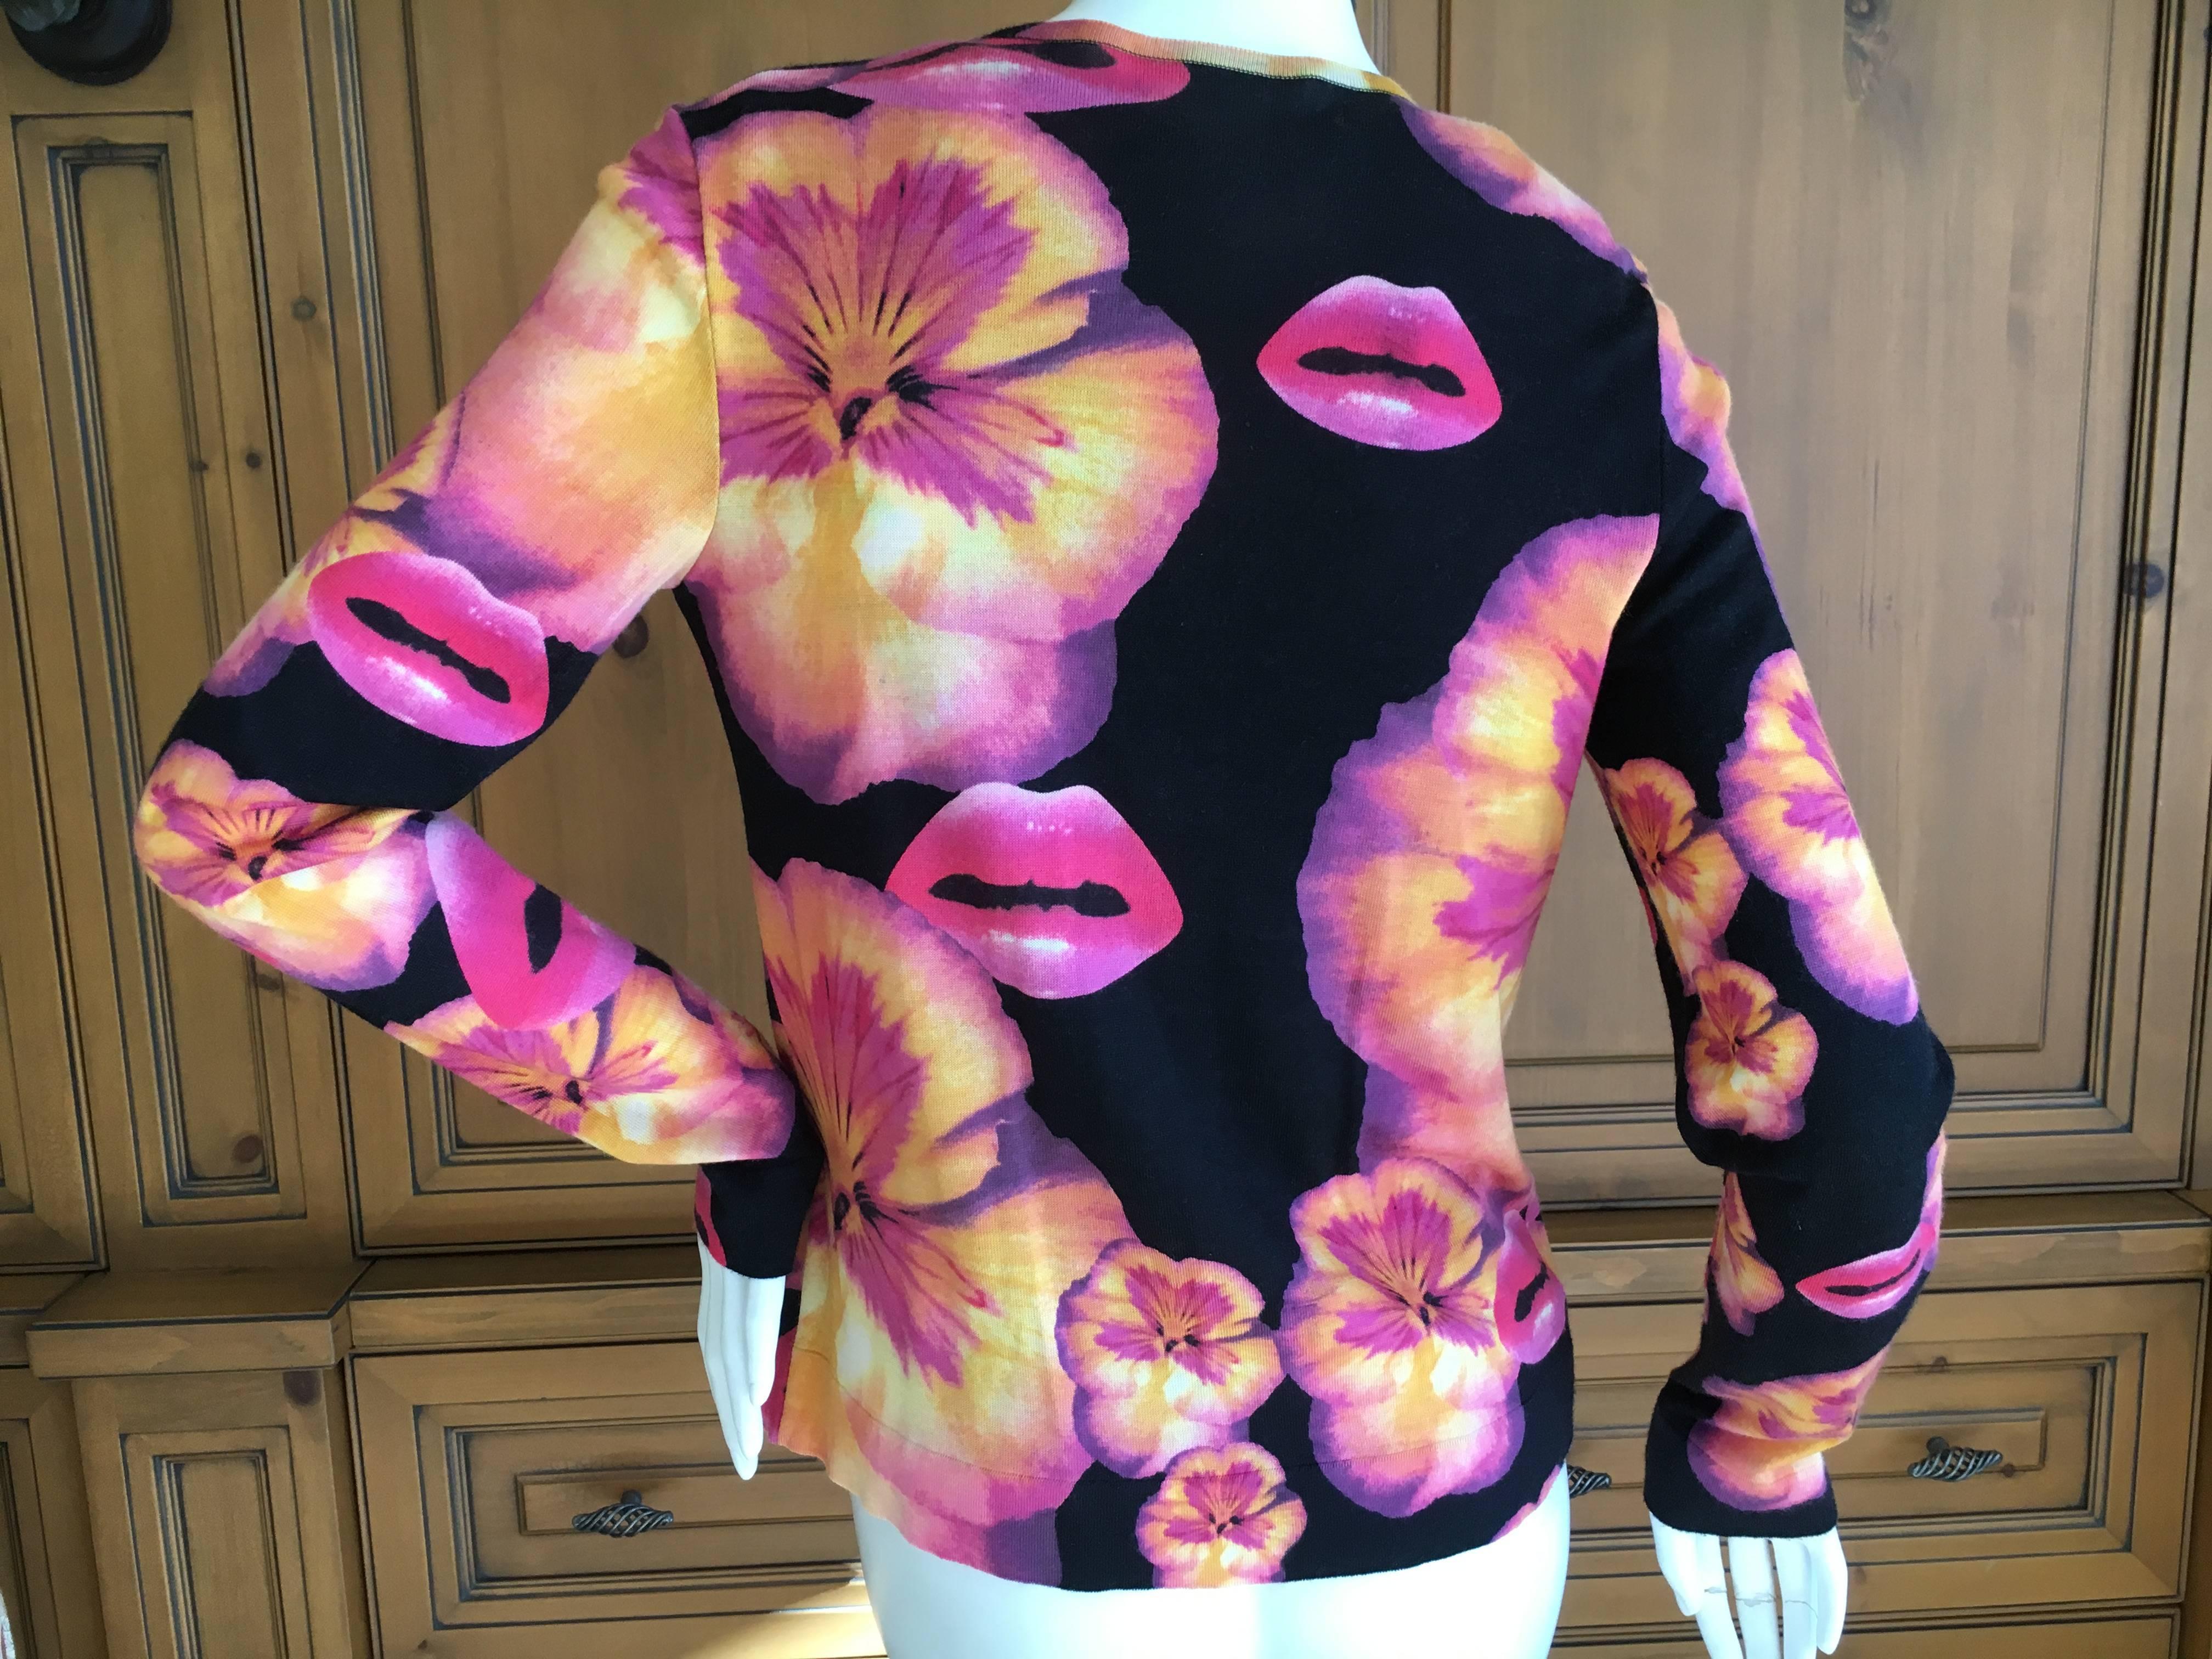 Christian Dior by John Galliano Surreal Lips and Pansey Cashmere Silk Blend Sweater Set.
Size 44
Bust 38